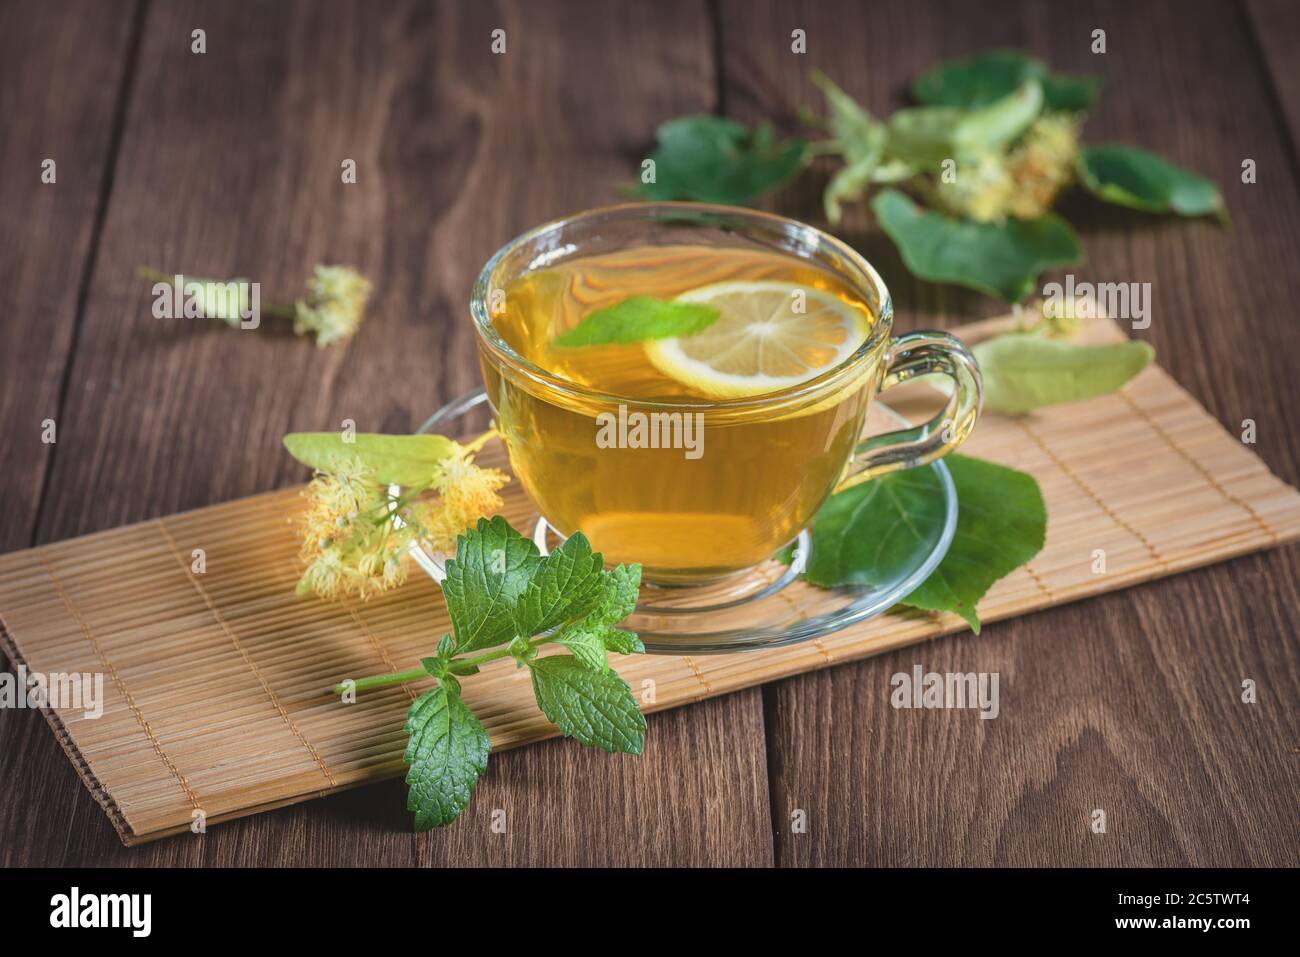 A cup of medicinal, lime tea, standing on a wooden table, surrounded by fragrant linden flowers, in the rays of sunlight. Stock Photo